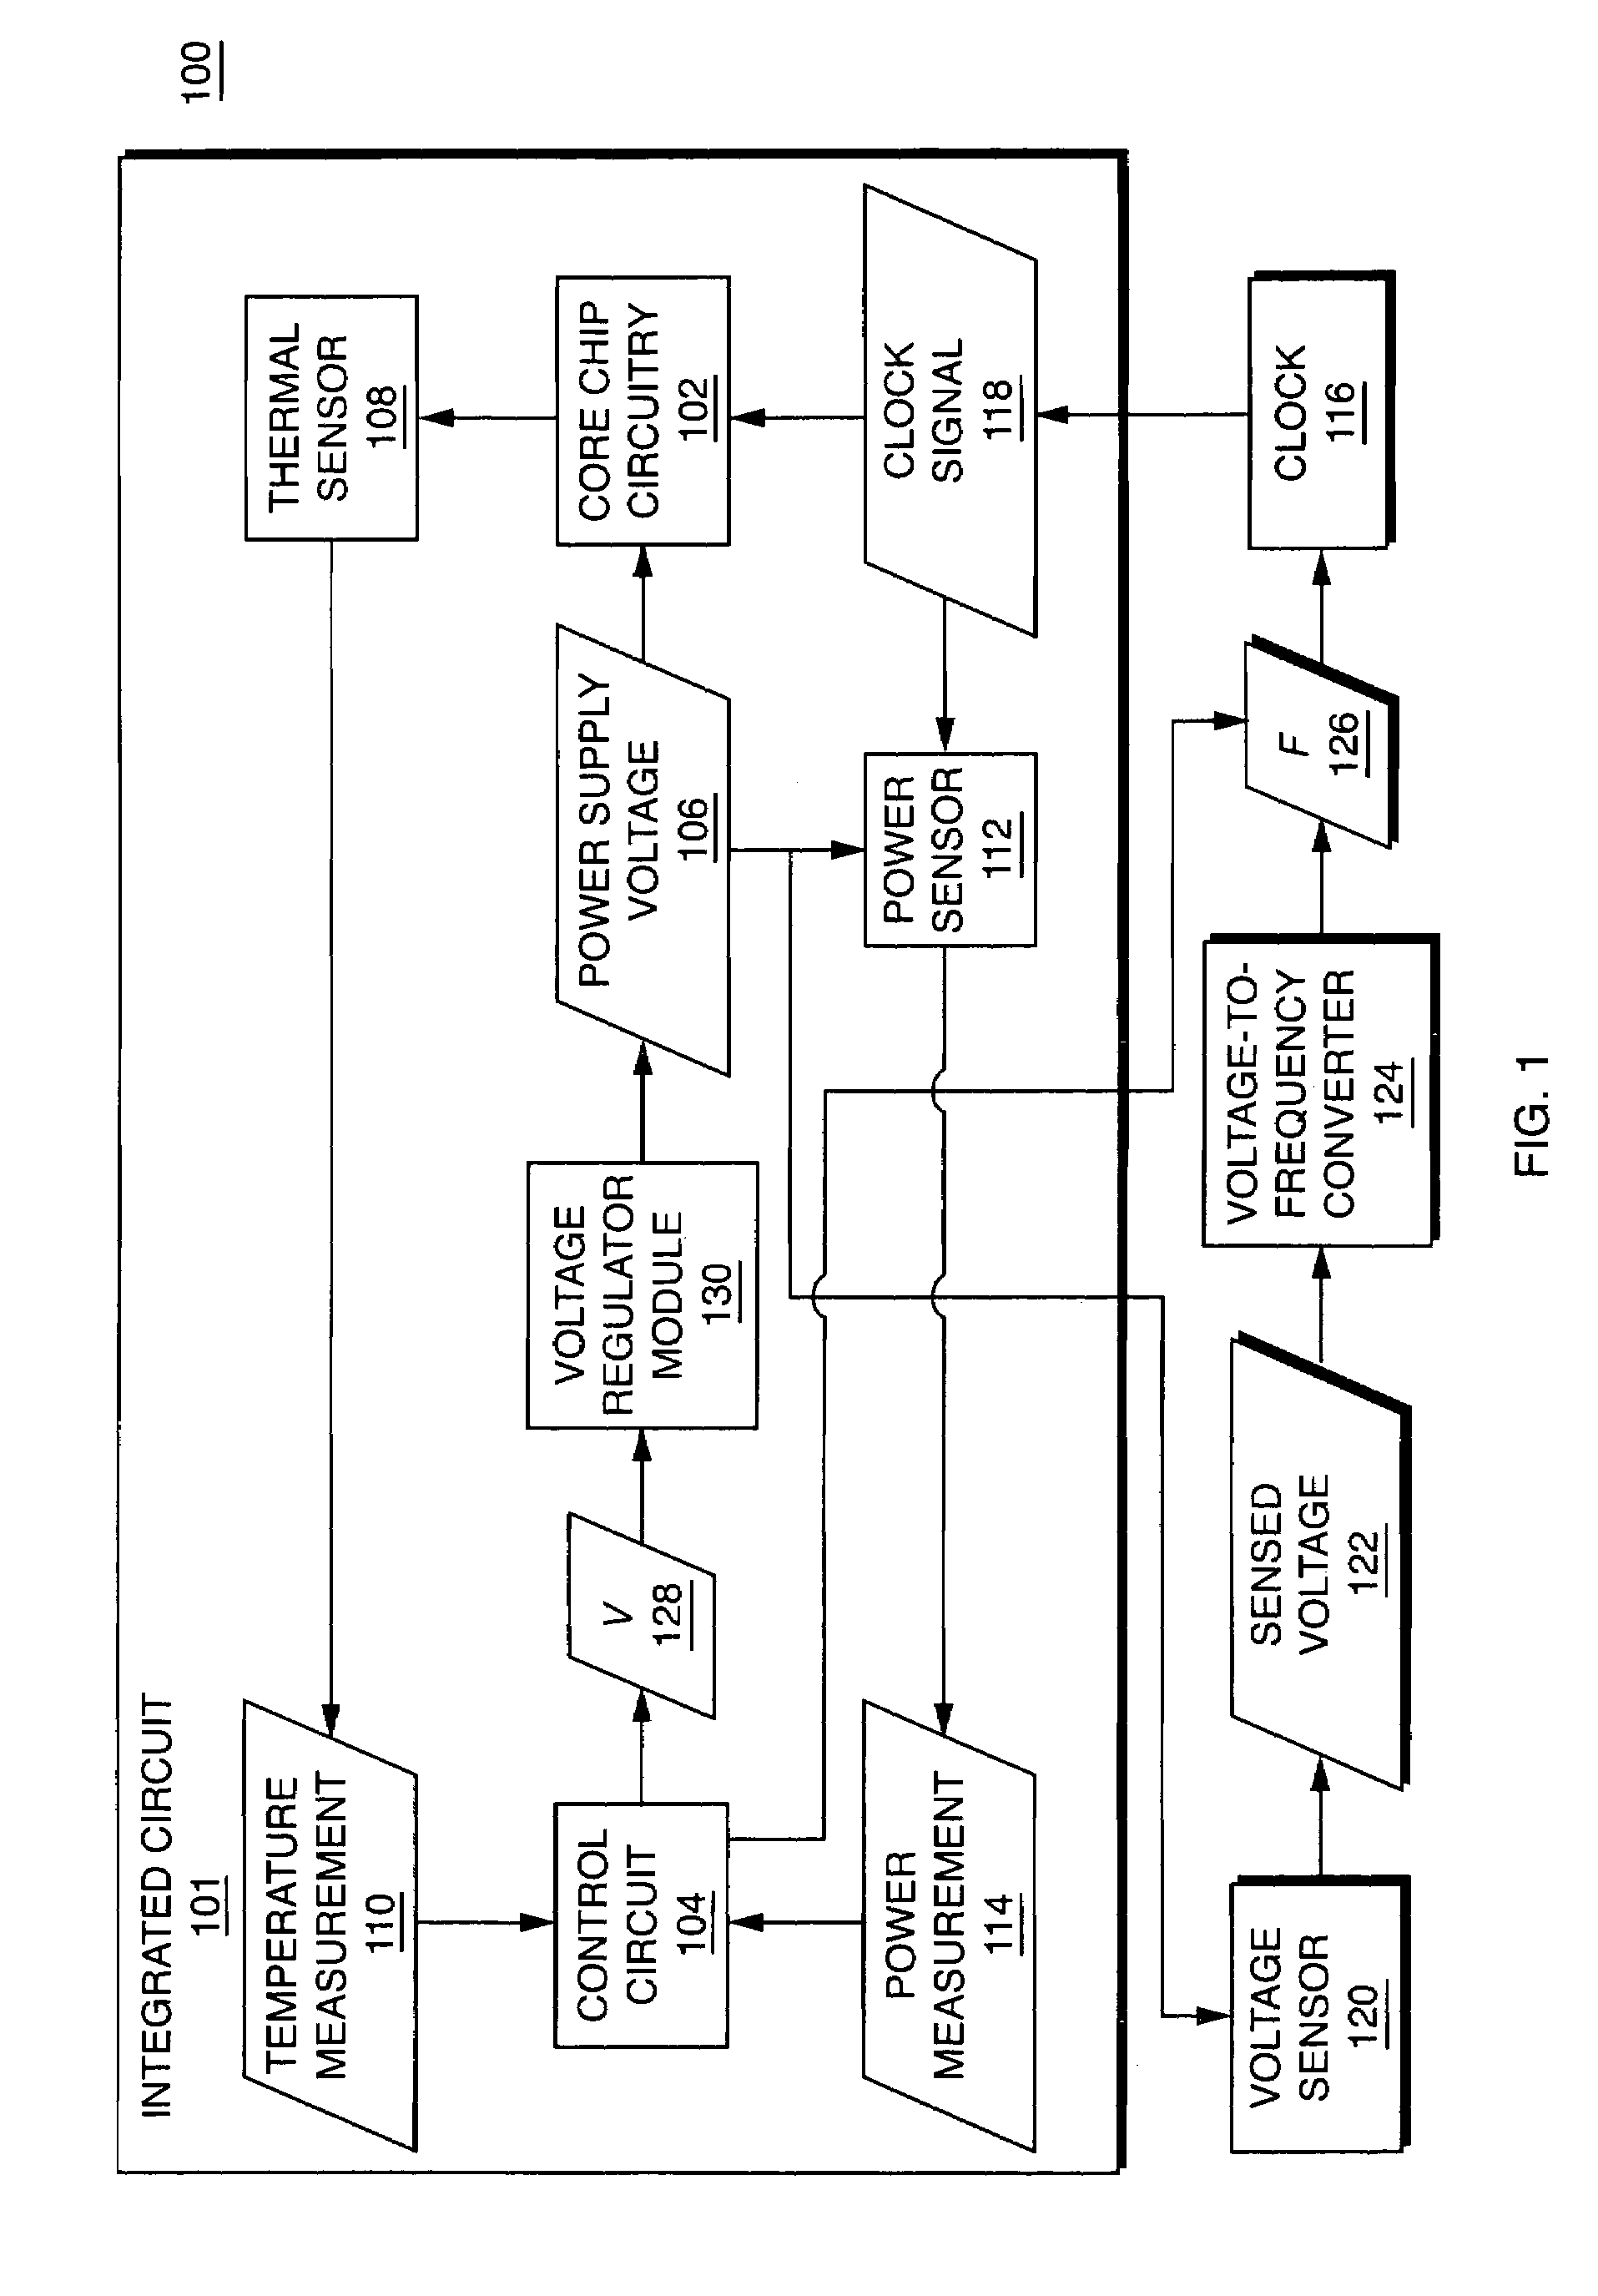 Voltage modulation for increased reliability in an integrated circuit